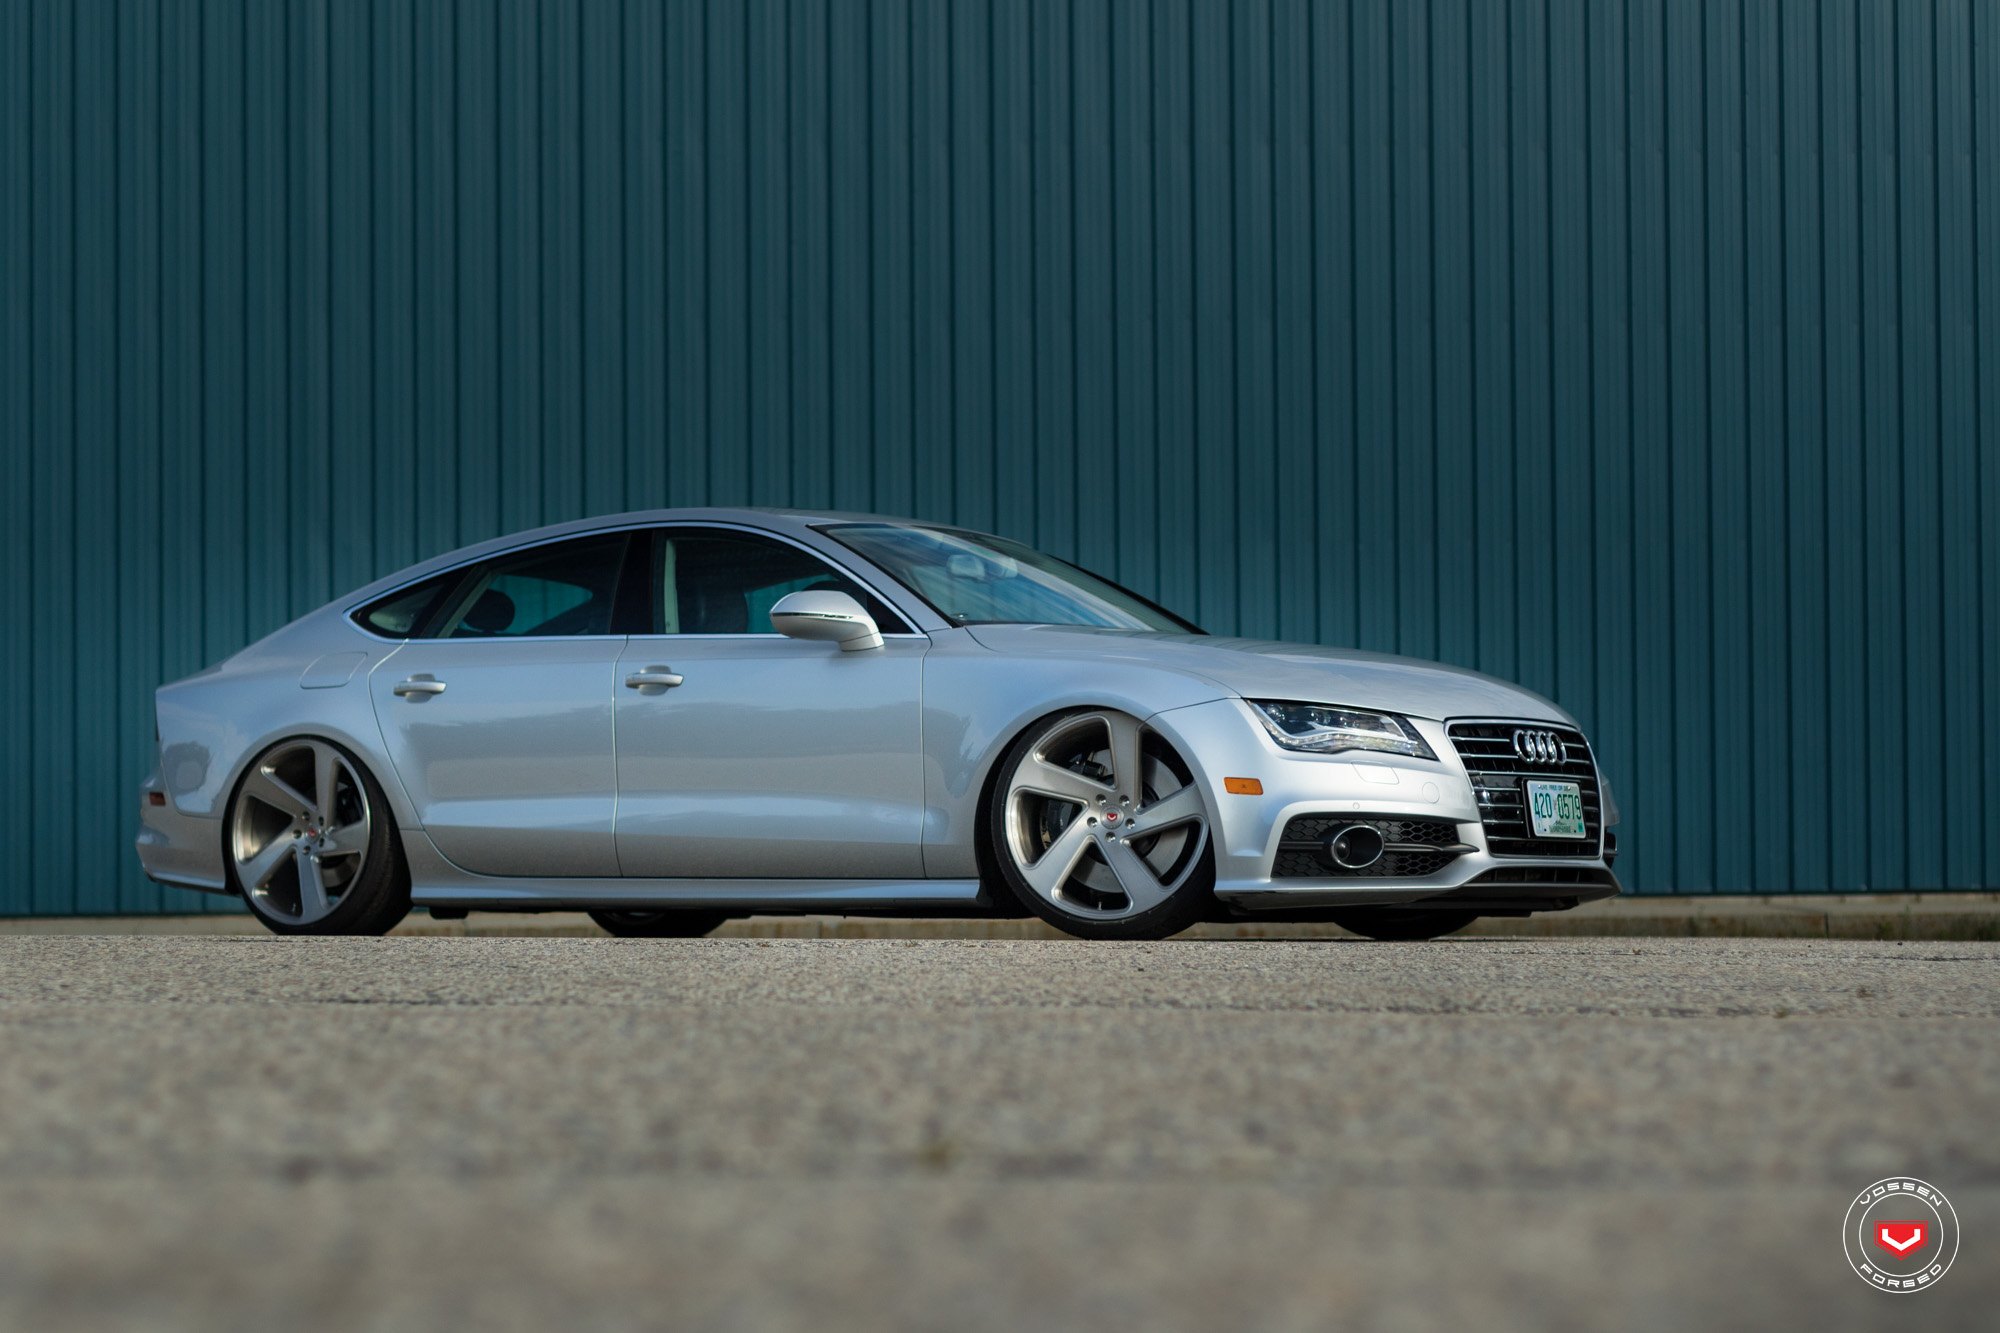 Gray Audi A7 with Aftermarket LED Headlights - Photo by Vossen